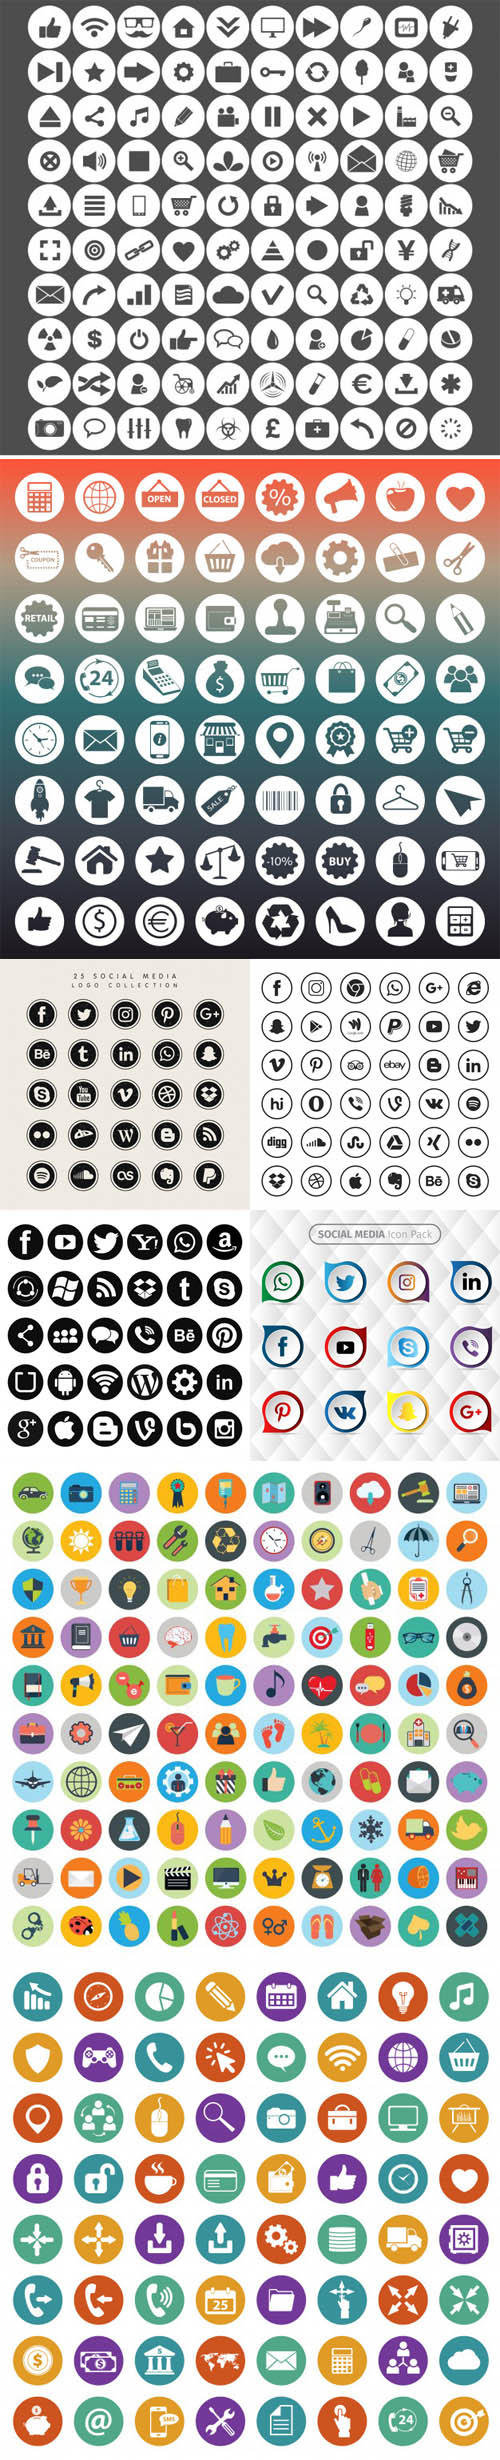 400+ Collection of Icons in Vector